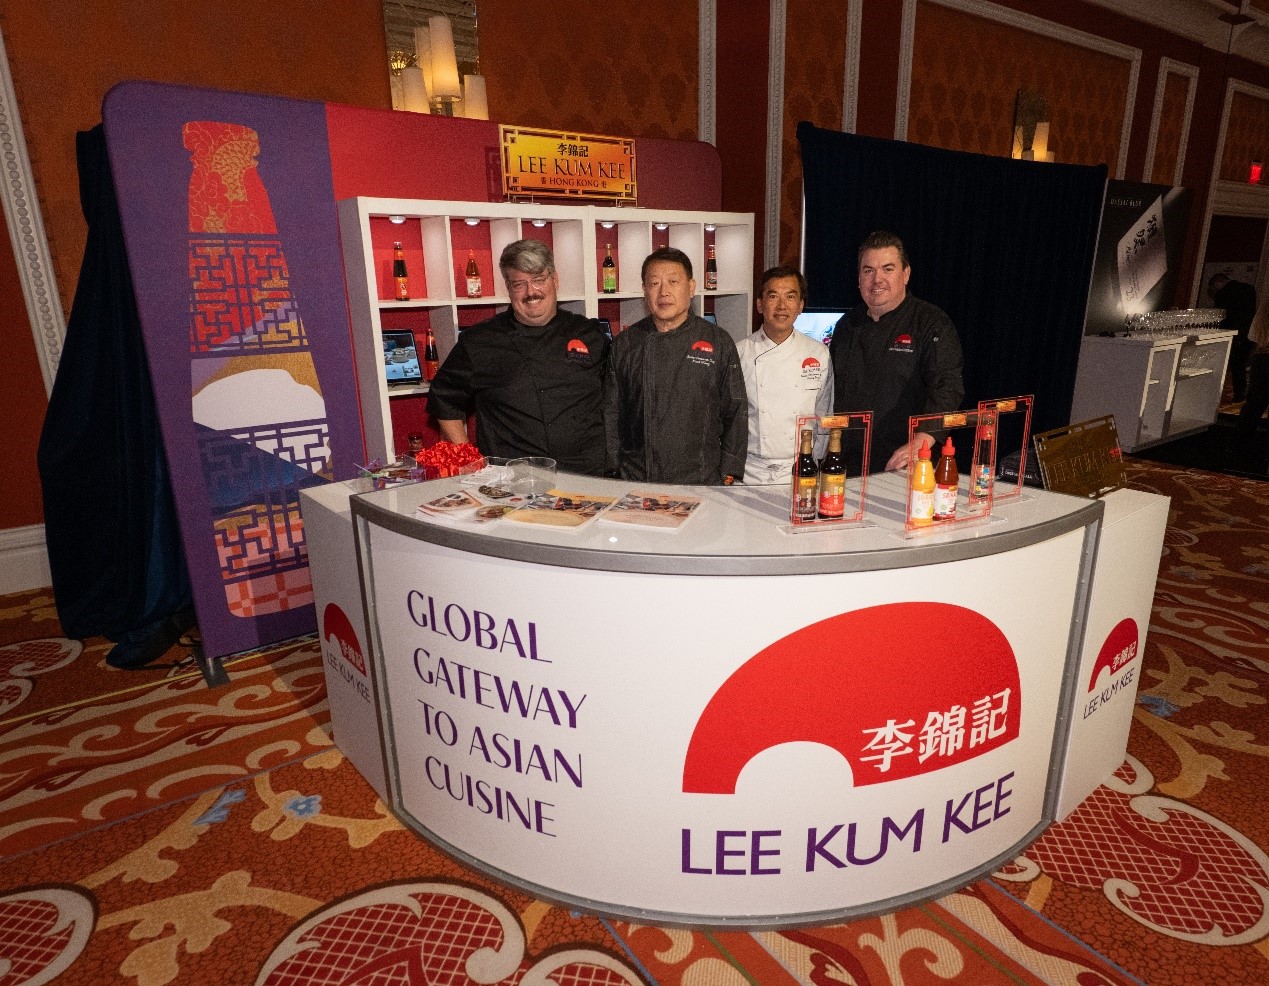 Lee Kum Kee is the Official Sauce & Condiment Partner of The World’s 50 Best Restaurants. (Photo: Focus Event Photography)